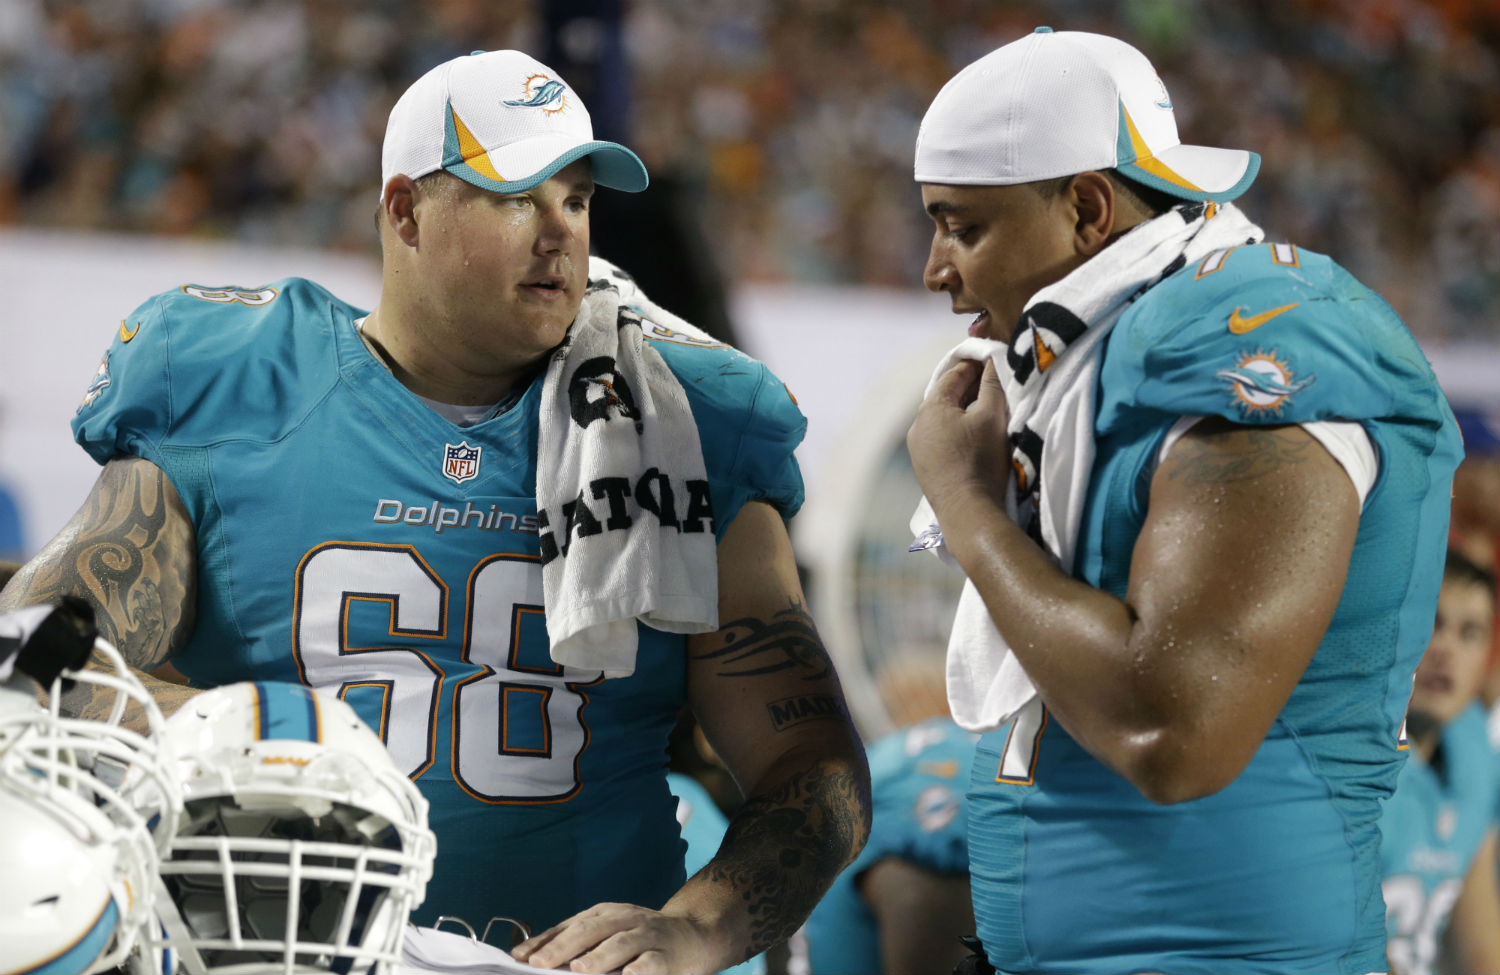 There’s Nothing Postracial About Richie Incognito or Craig Cobb